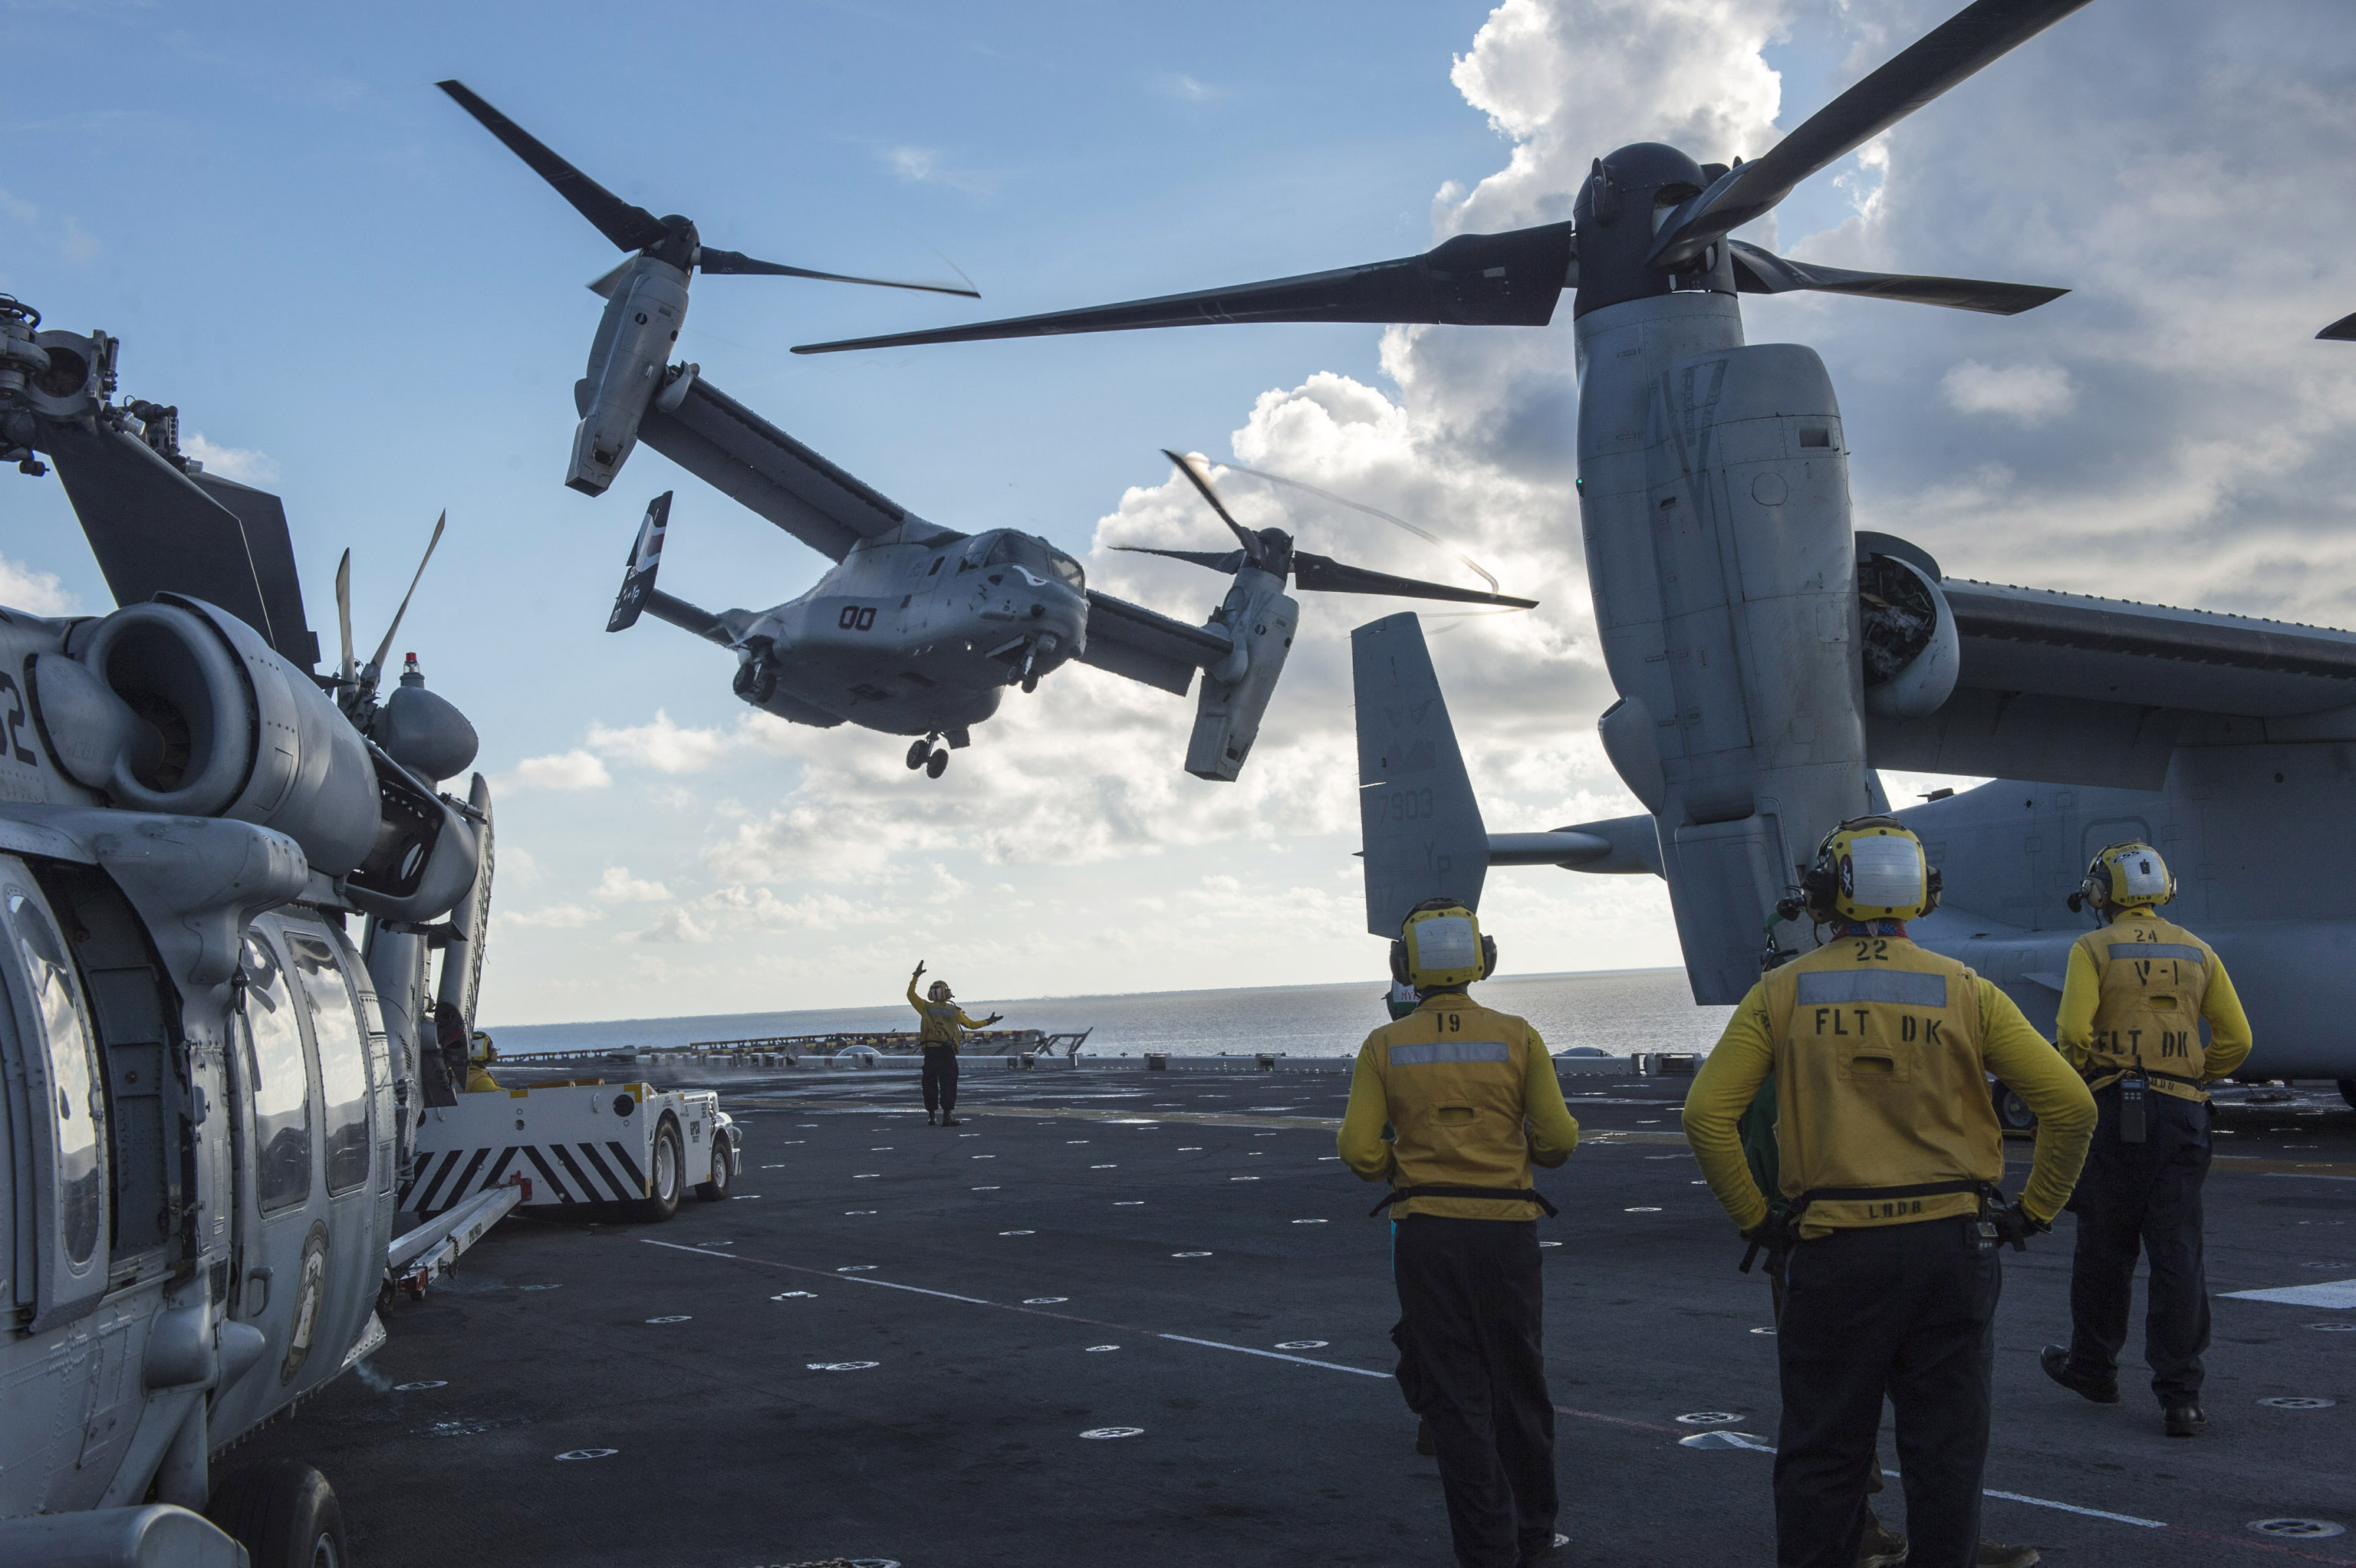 MV-22 Osprey assigned to Marine Medium Tiltrotor Squadron (VMM) 163 launches from USS Makin Island (LHD-8) on Aug. 24, 2014. US Navy Photo